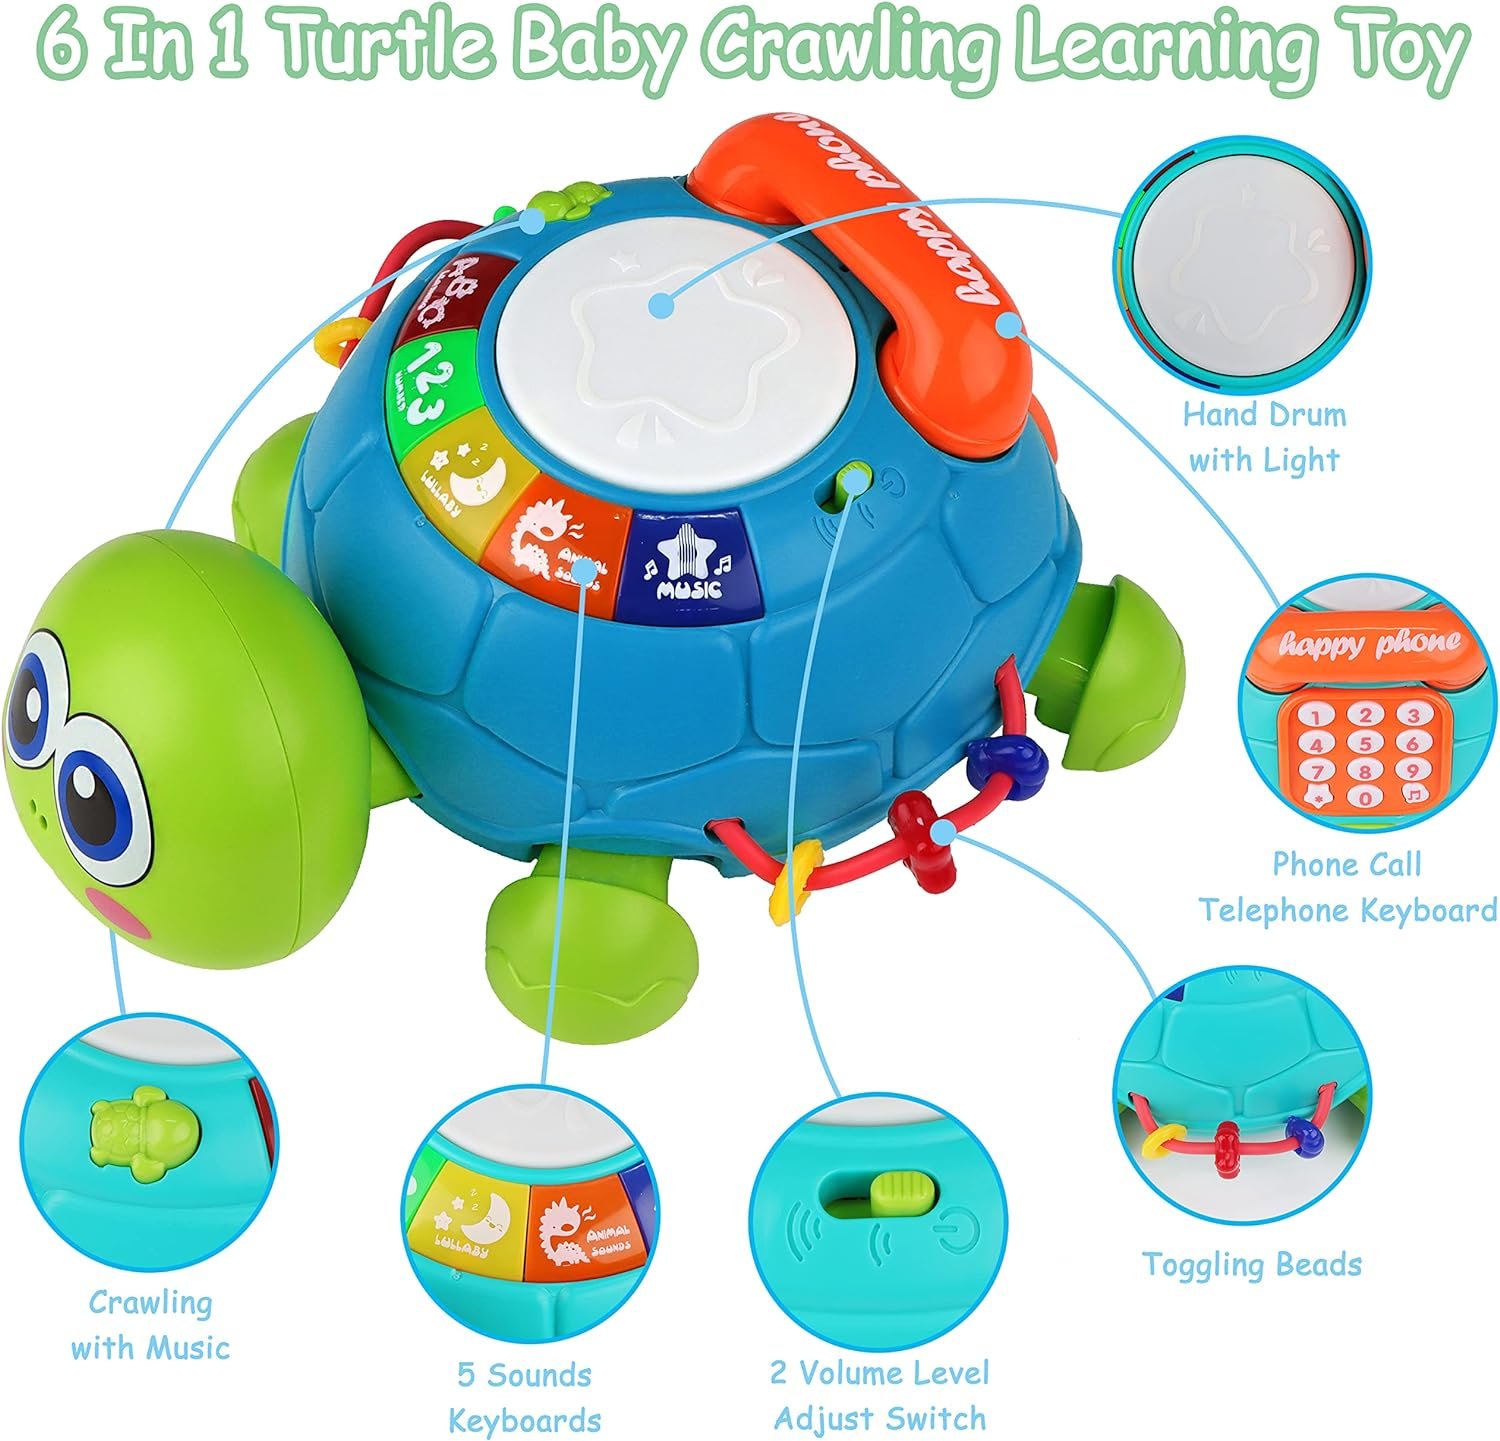 Musical Turtle Crawling Toys Review